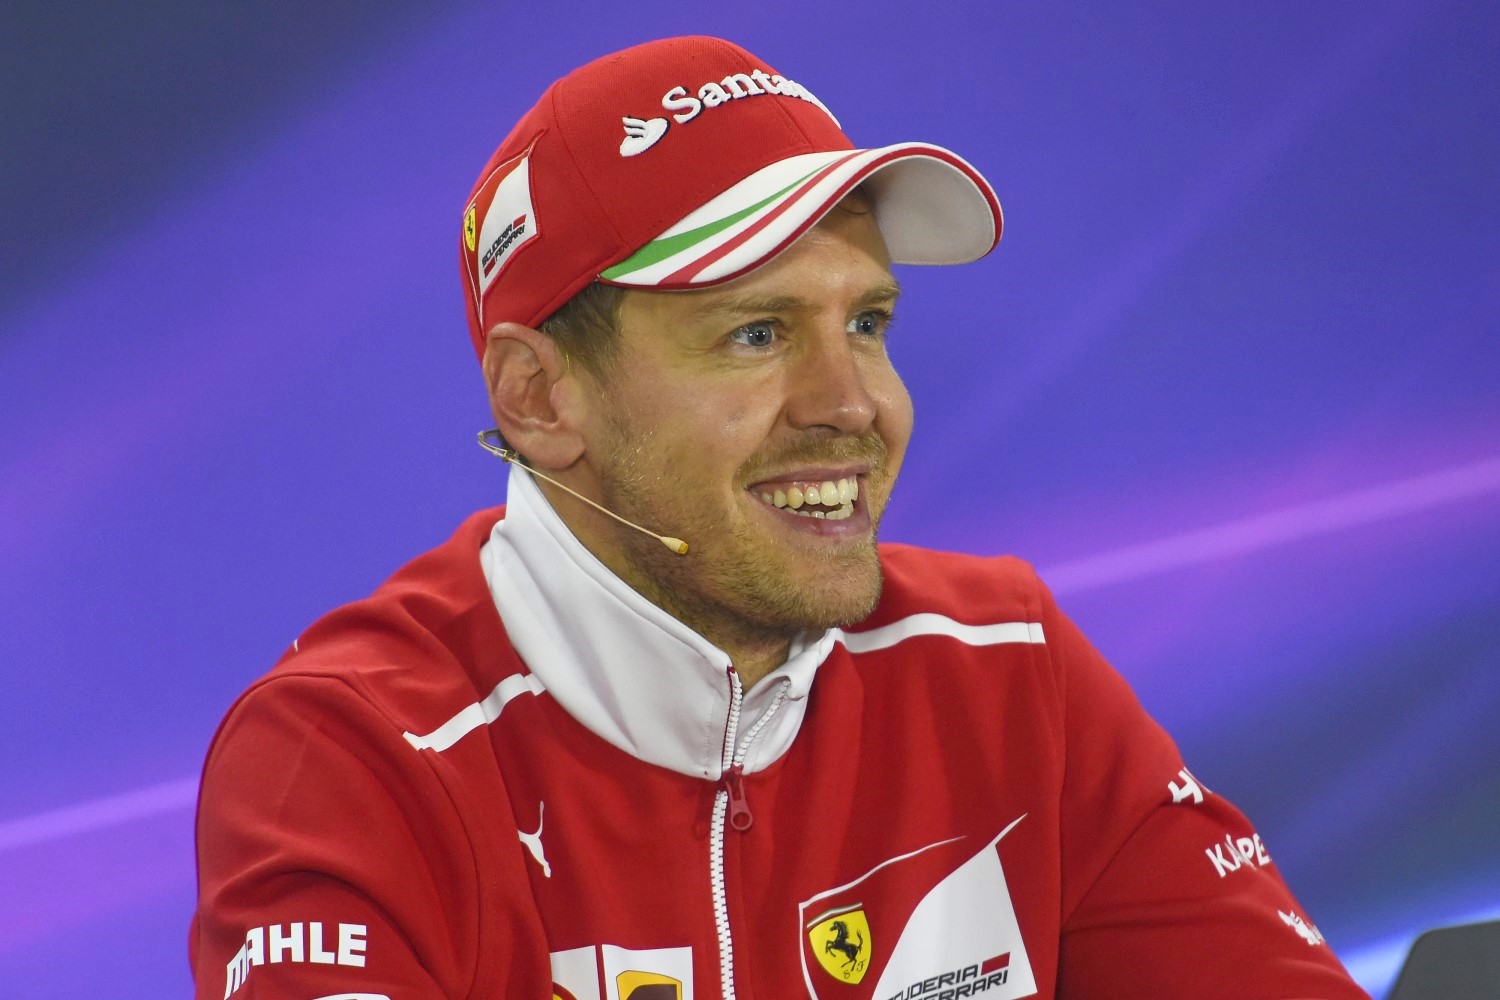 If Vettel does leave Ferrari and Raikkonen retires or is pushed out, Ferrari would need two drivers